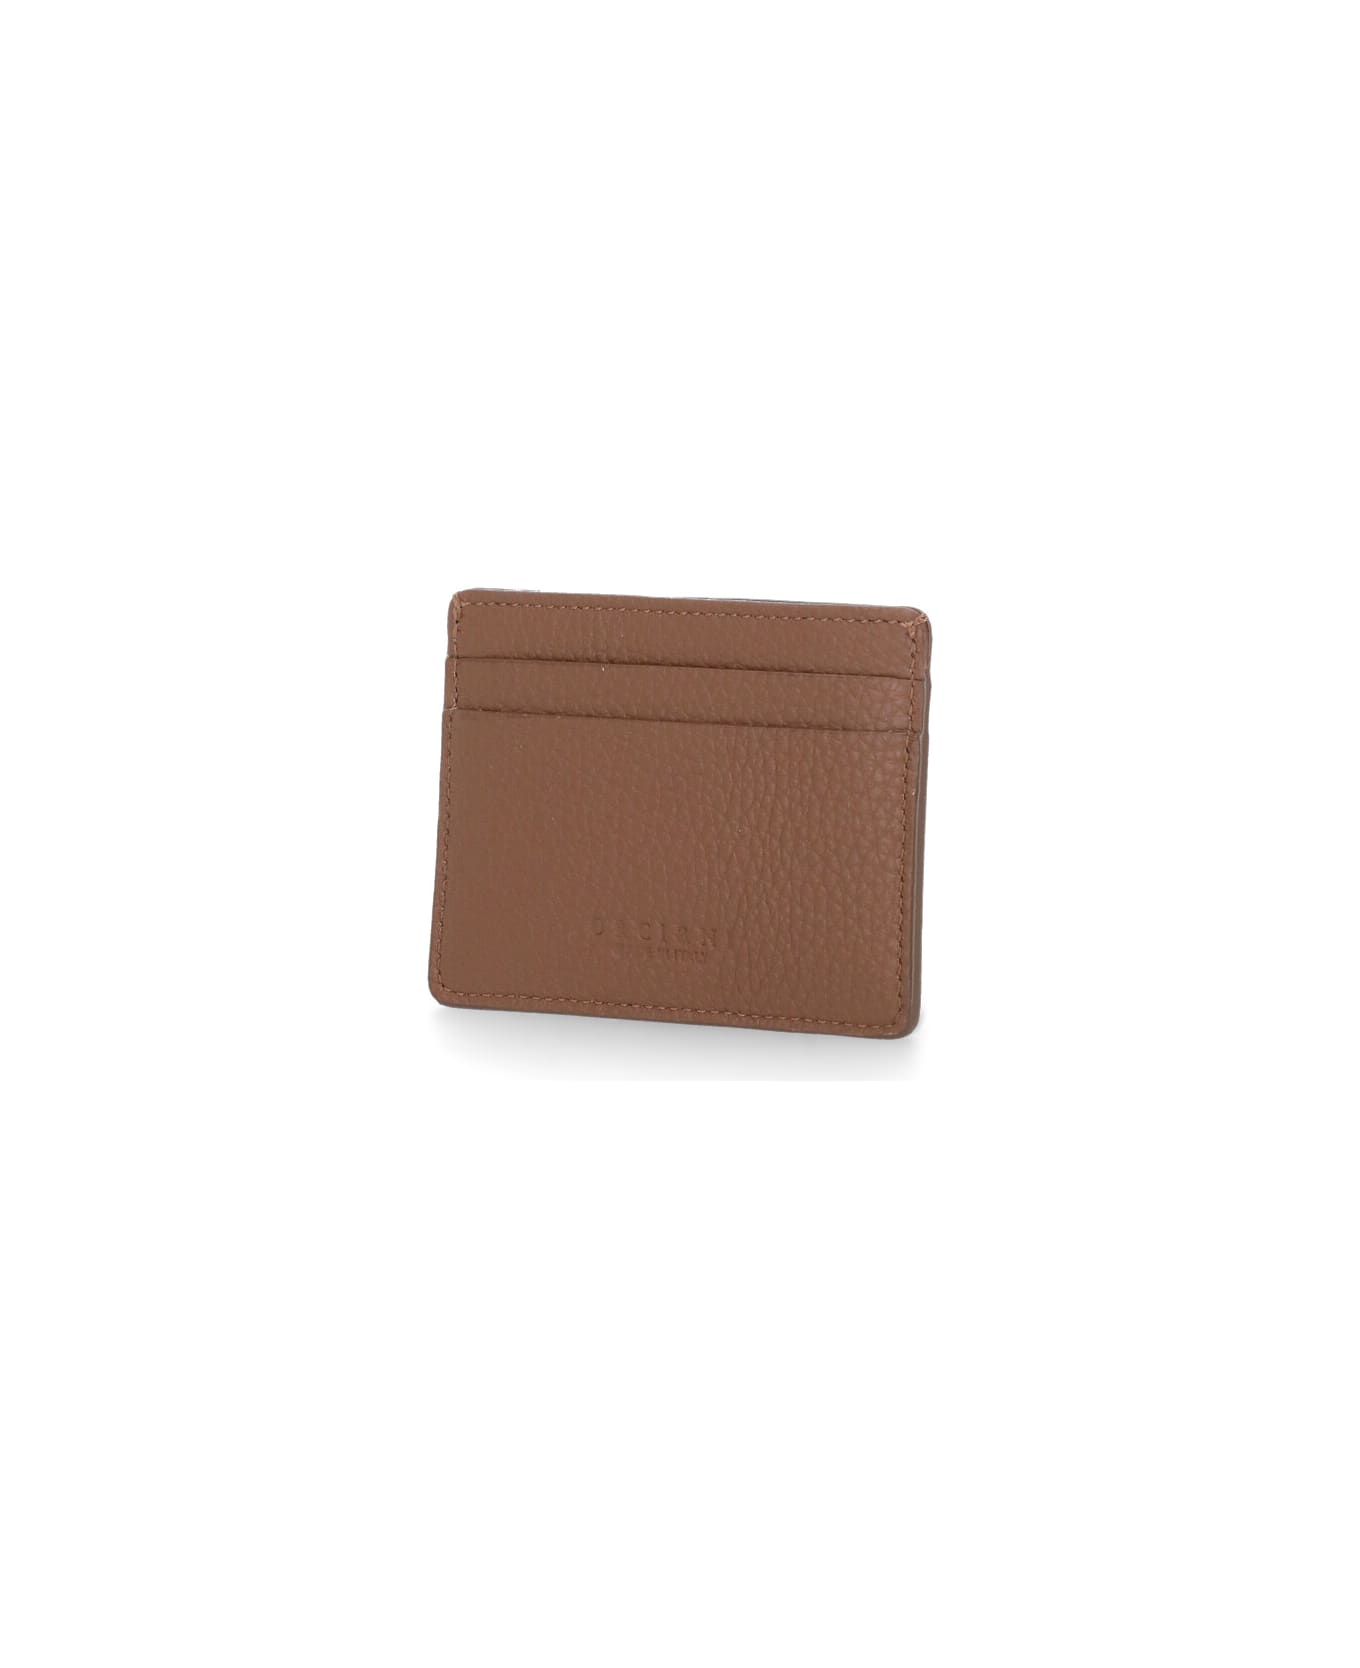 Orciani Micron Leather Cards Holder - Brown